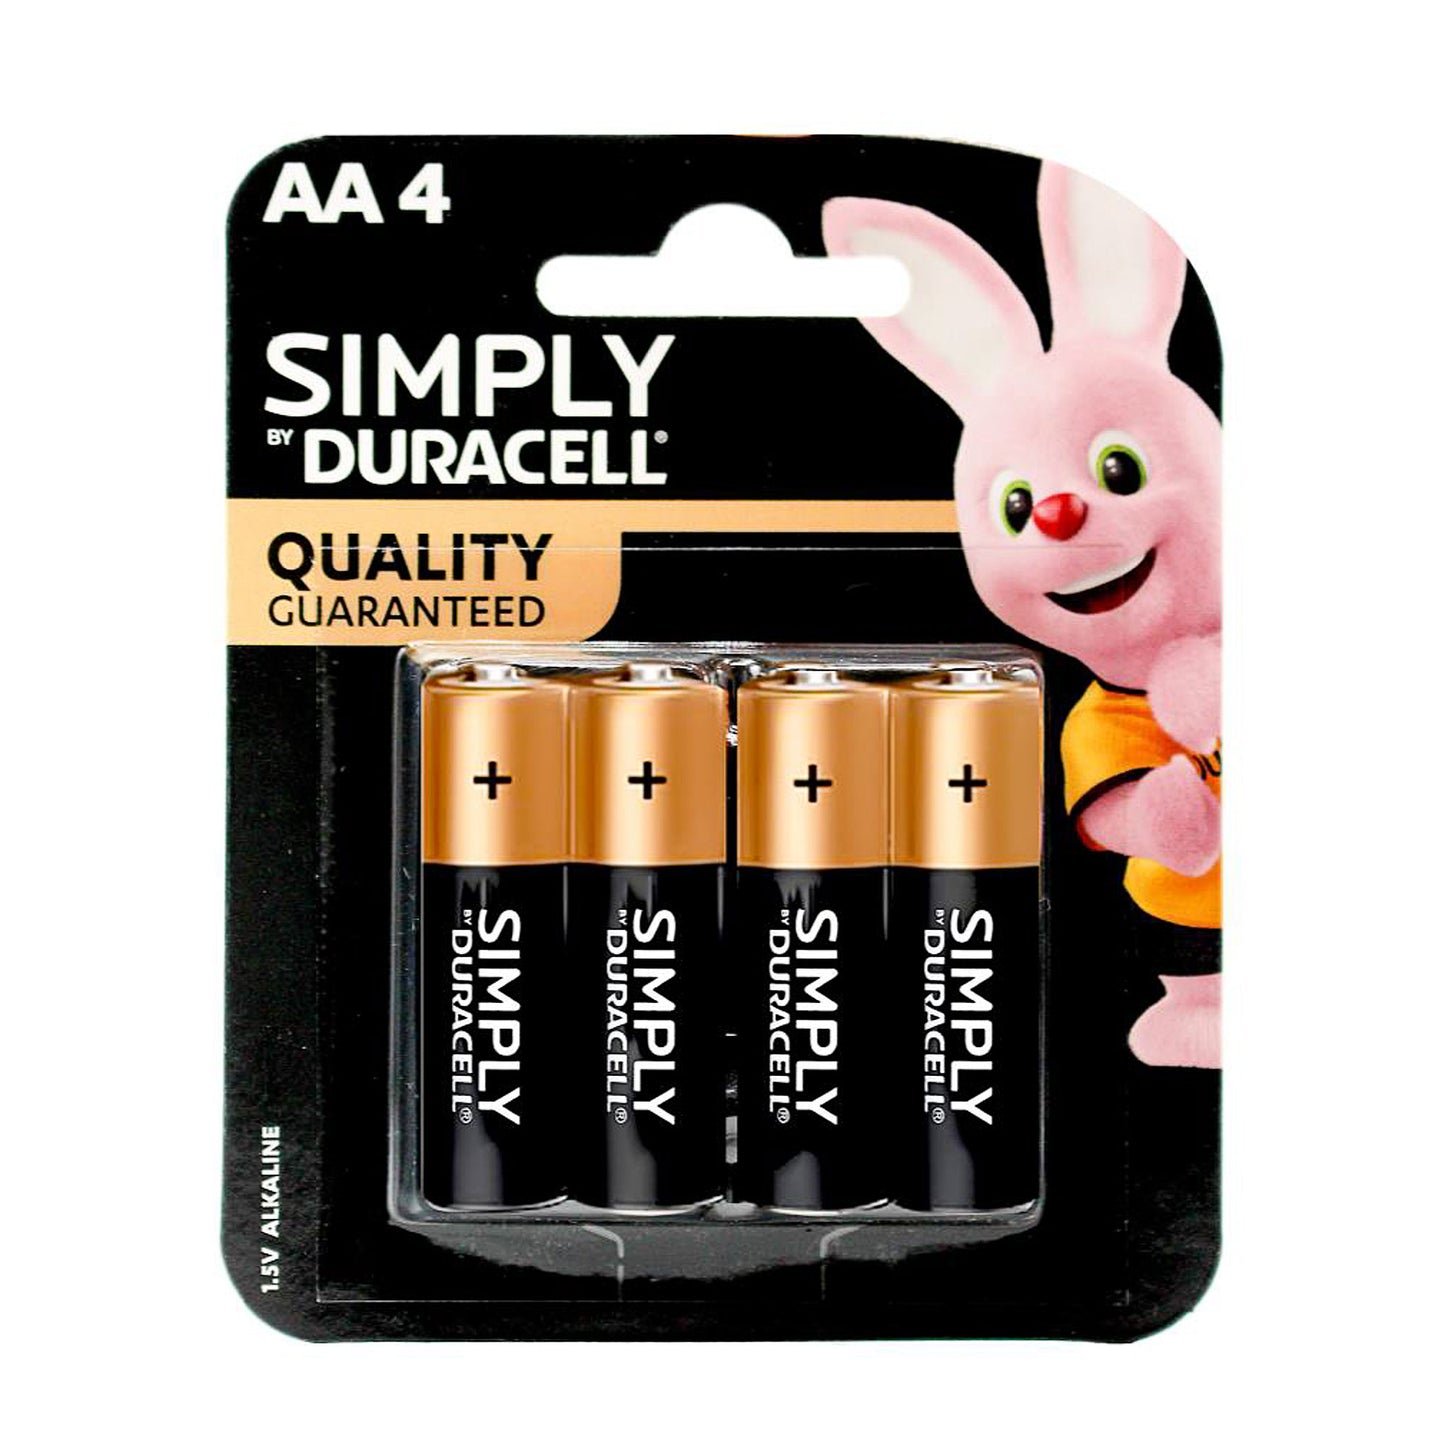 Duracell AA Simply Batteries 4pk